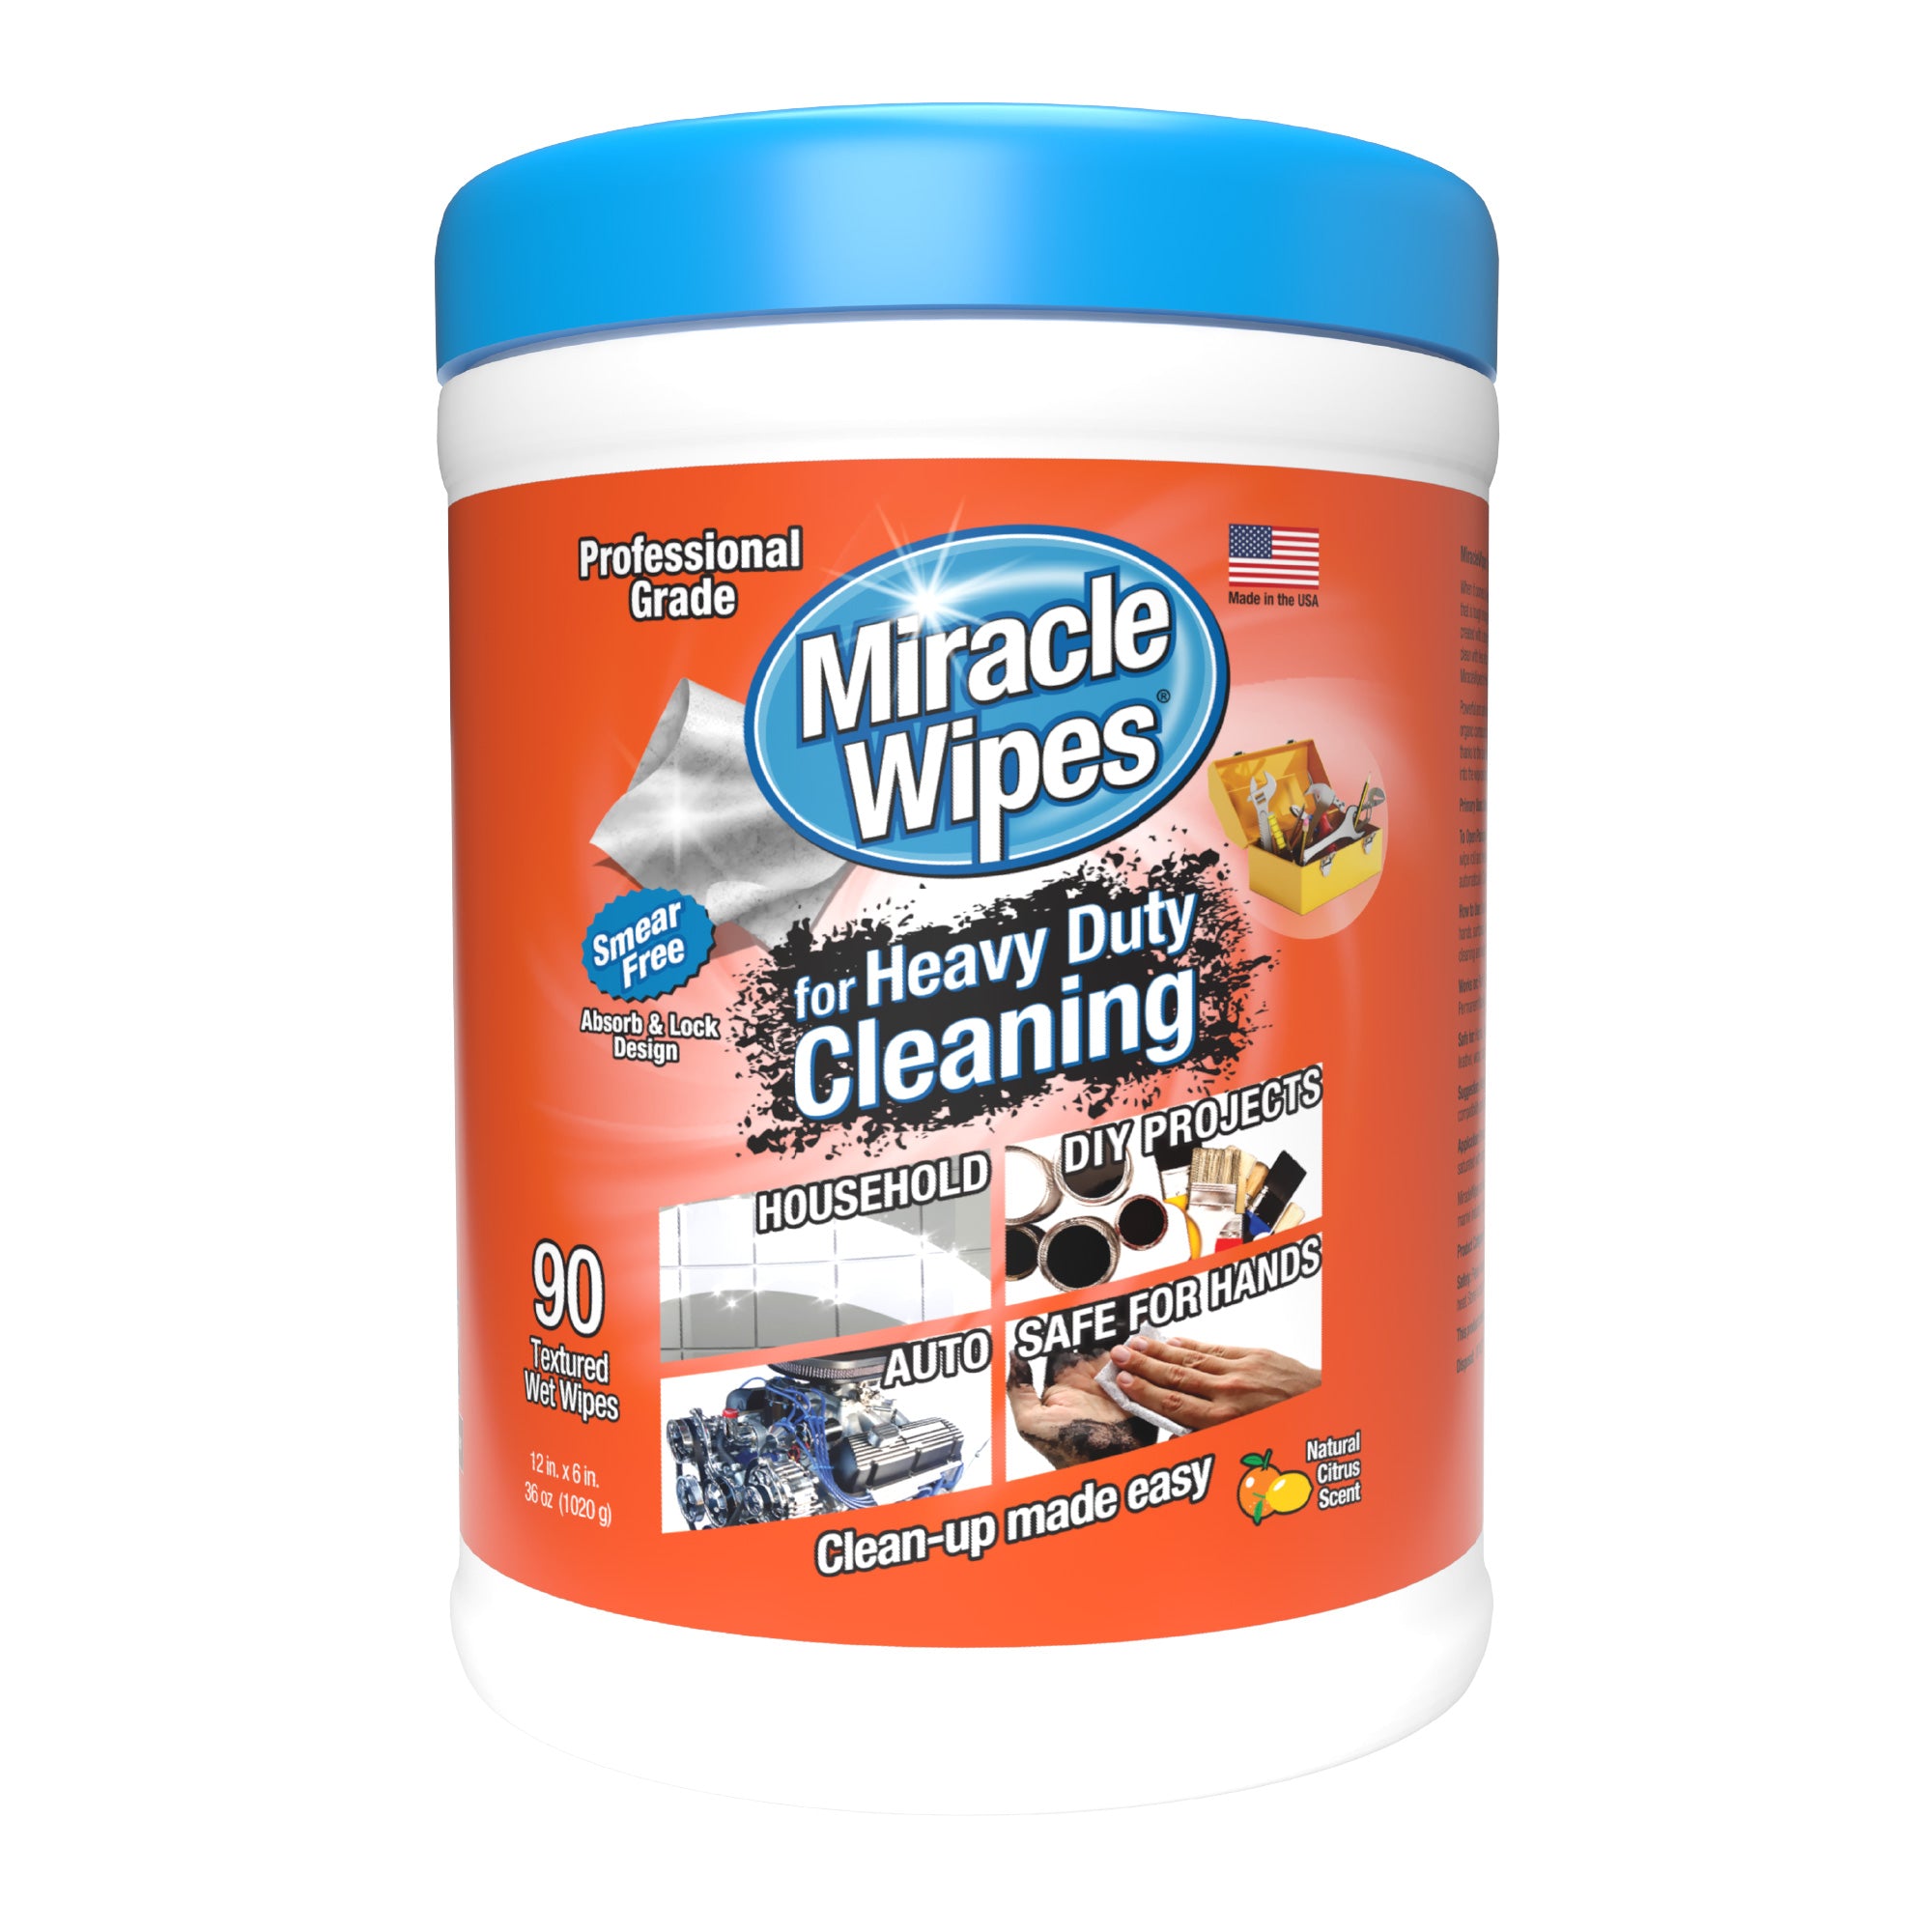 MiracleWipes for Stainless Steel, Cleaner Wipes for Kitchen and Home  Appliances, Including Oven, Refrigerator, Dishwasher, Microwave, Sink,  Hood, and